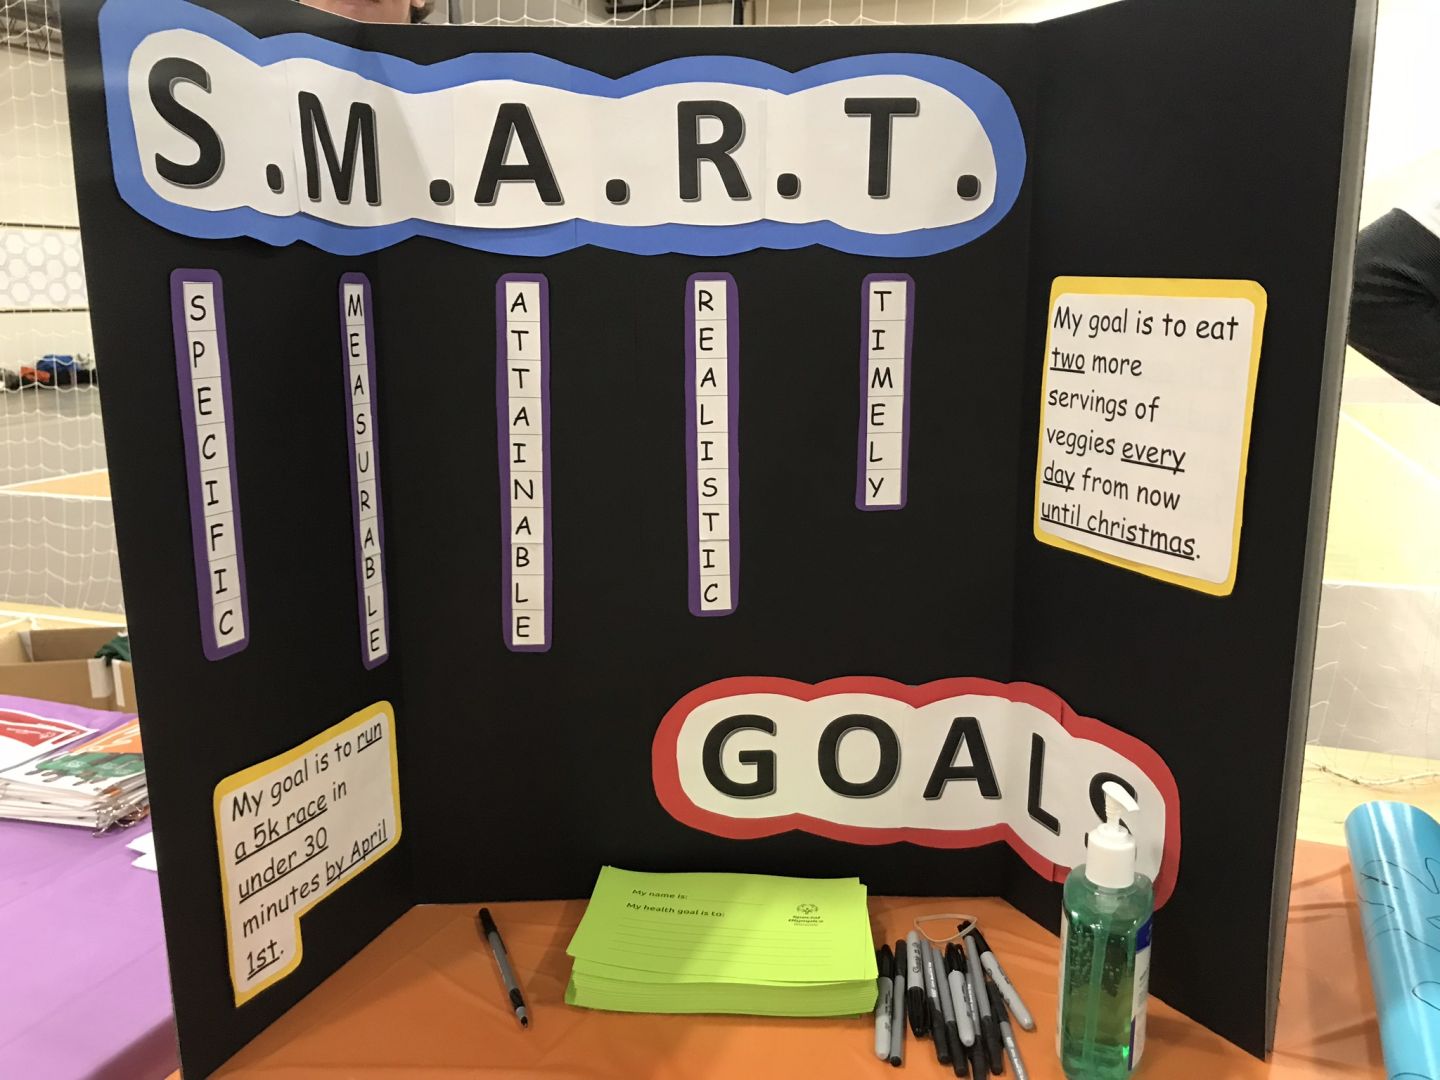 The S.M.A.R.T. Goals display at the pledge station